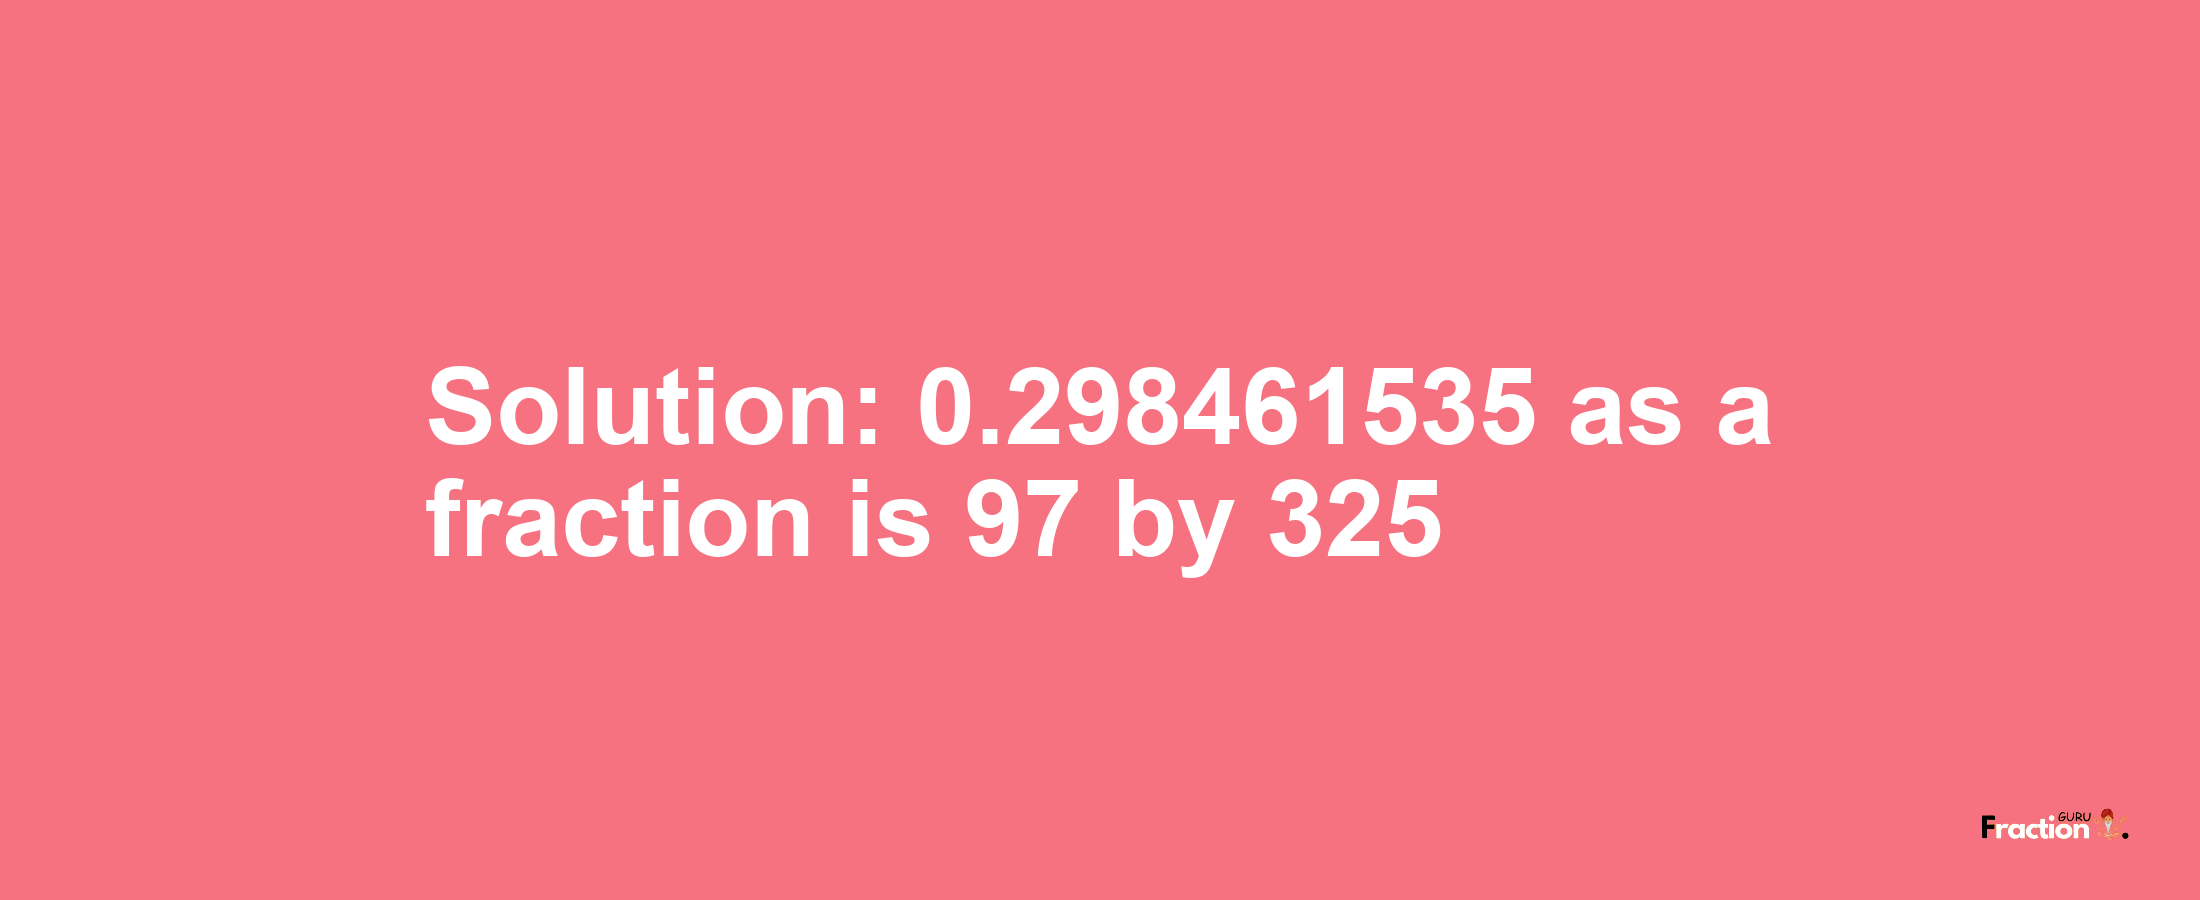 Solution:0.298461535 as a fraction is 97/325